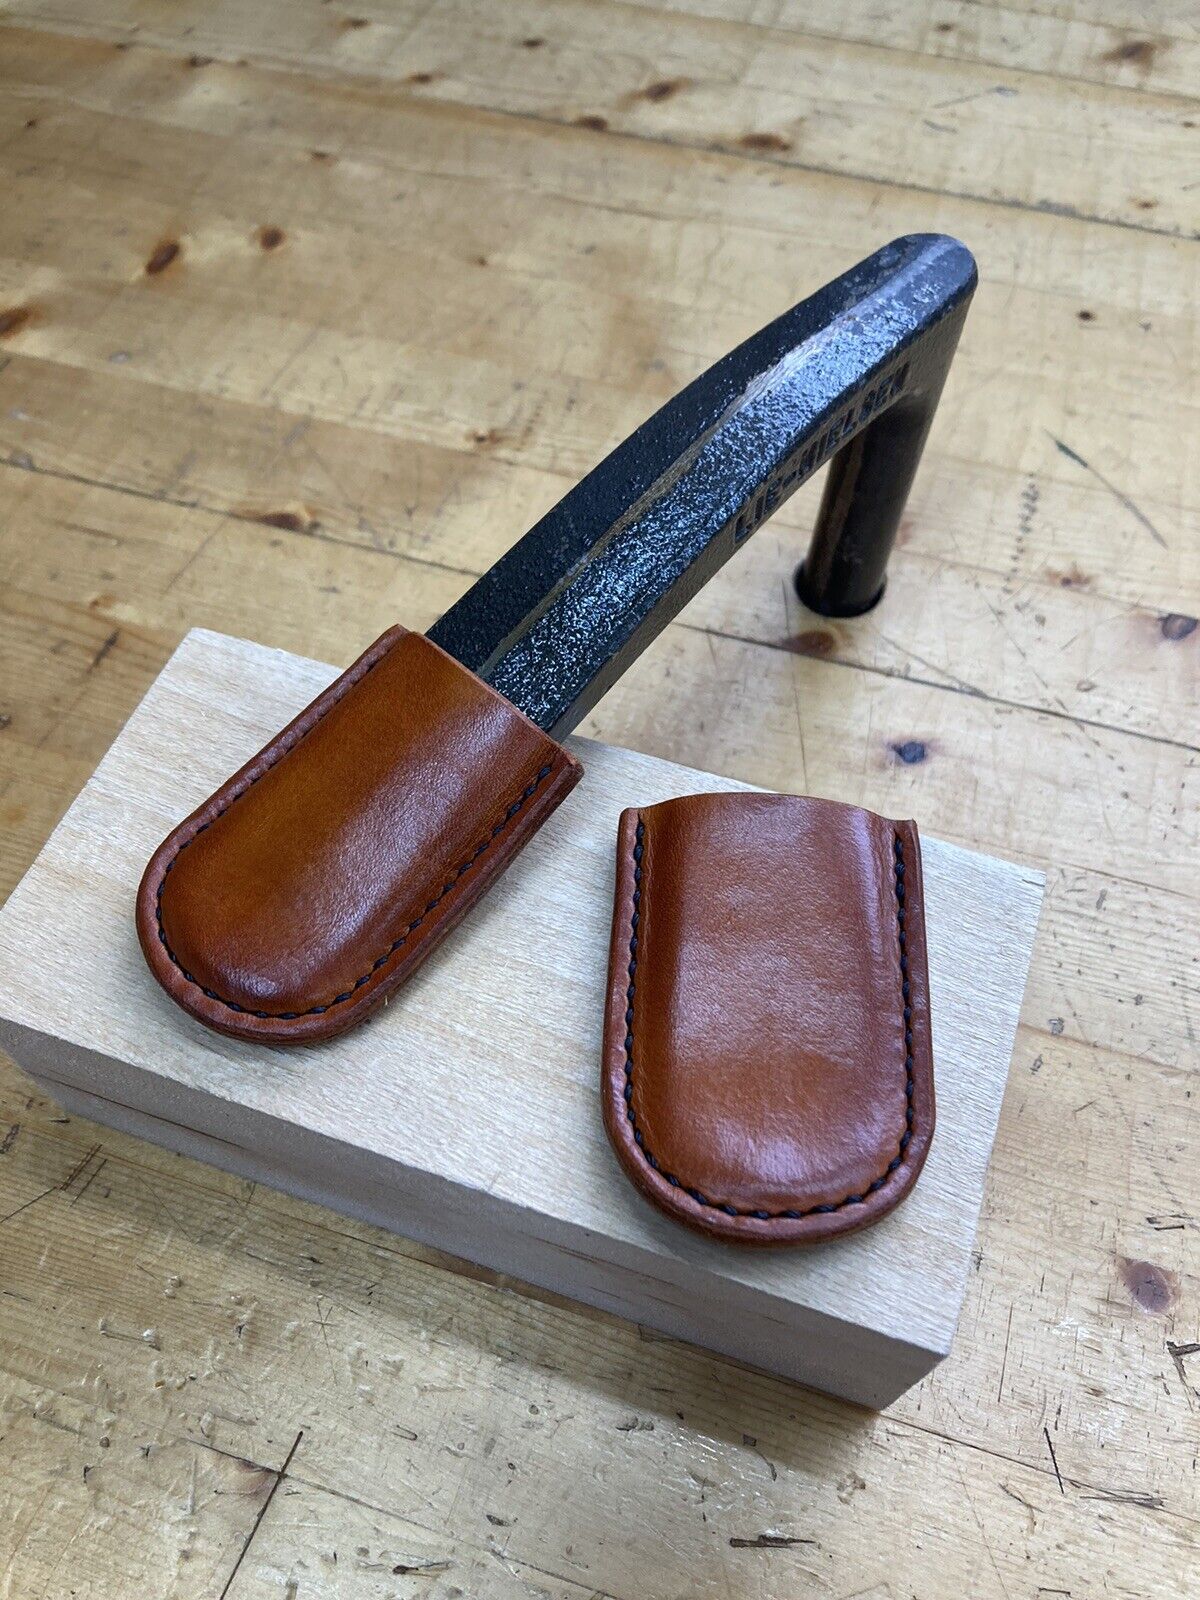 Pair of Leather Shoes / Pads / Covers for Lie-Nielsen Holdfast